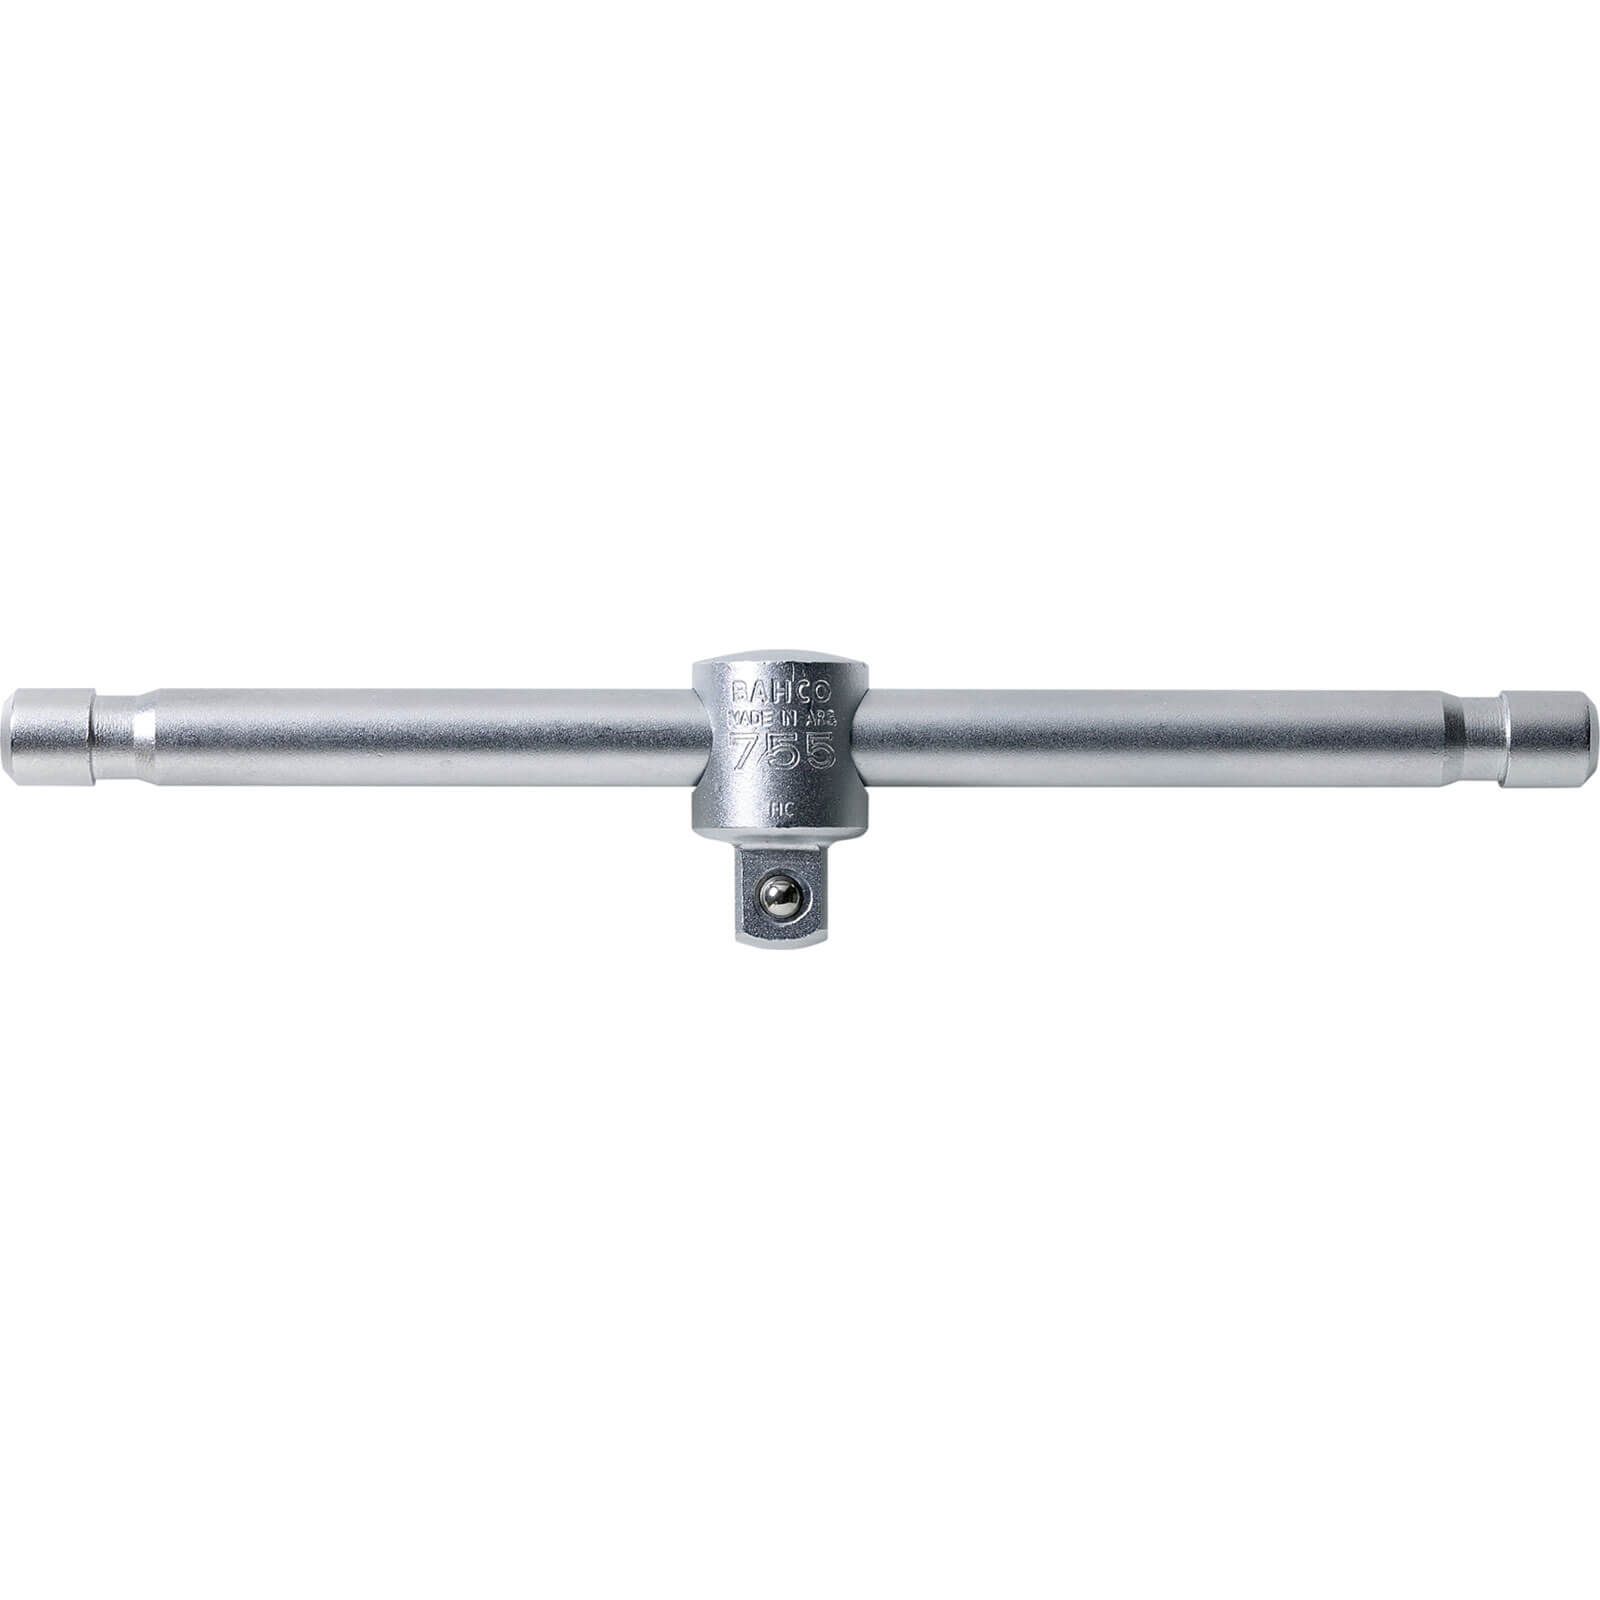 Image of Bahco 3/8" Drive Sliding T Bar for Sockets 3/8" 160mm